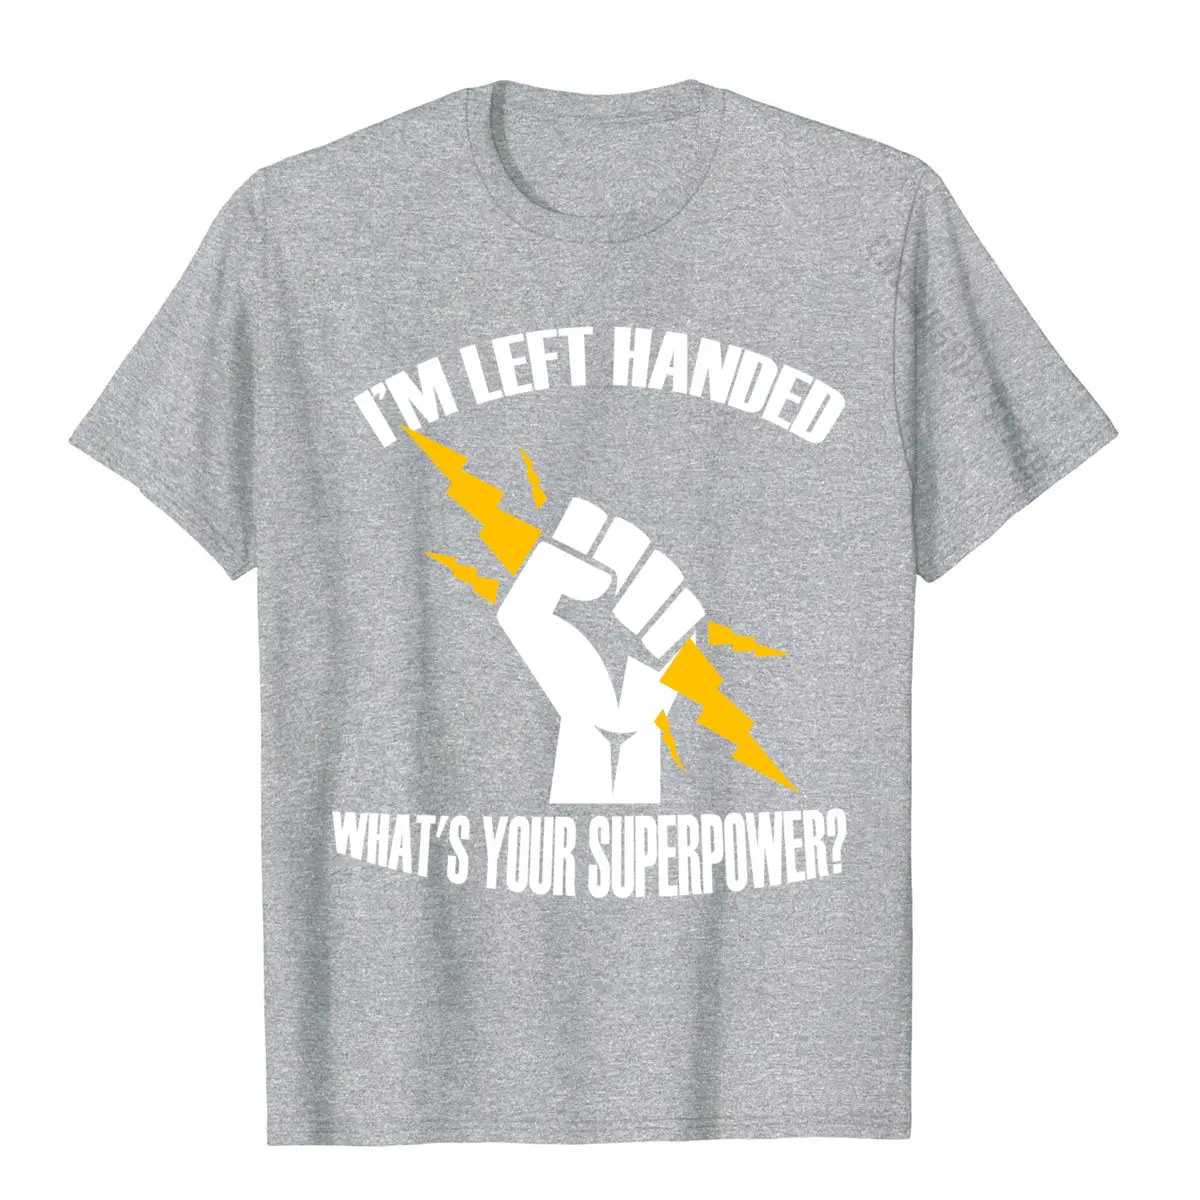 https://ae01.alicdn.com/kf/H186e54462e184513a0f2914723faccb7N/I-m-Left-Handed-What-s-Your-Superpower-Funny-T-Shirt-Lefty-Hot-Sale-Casual-Tops.jpg